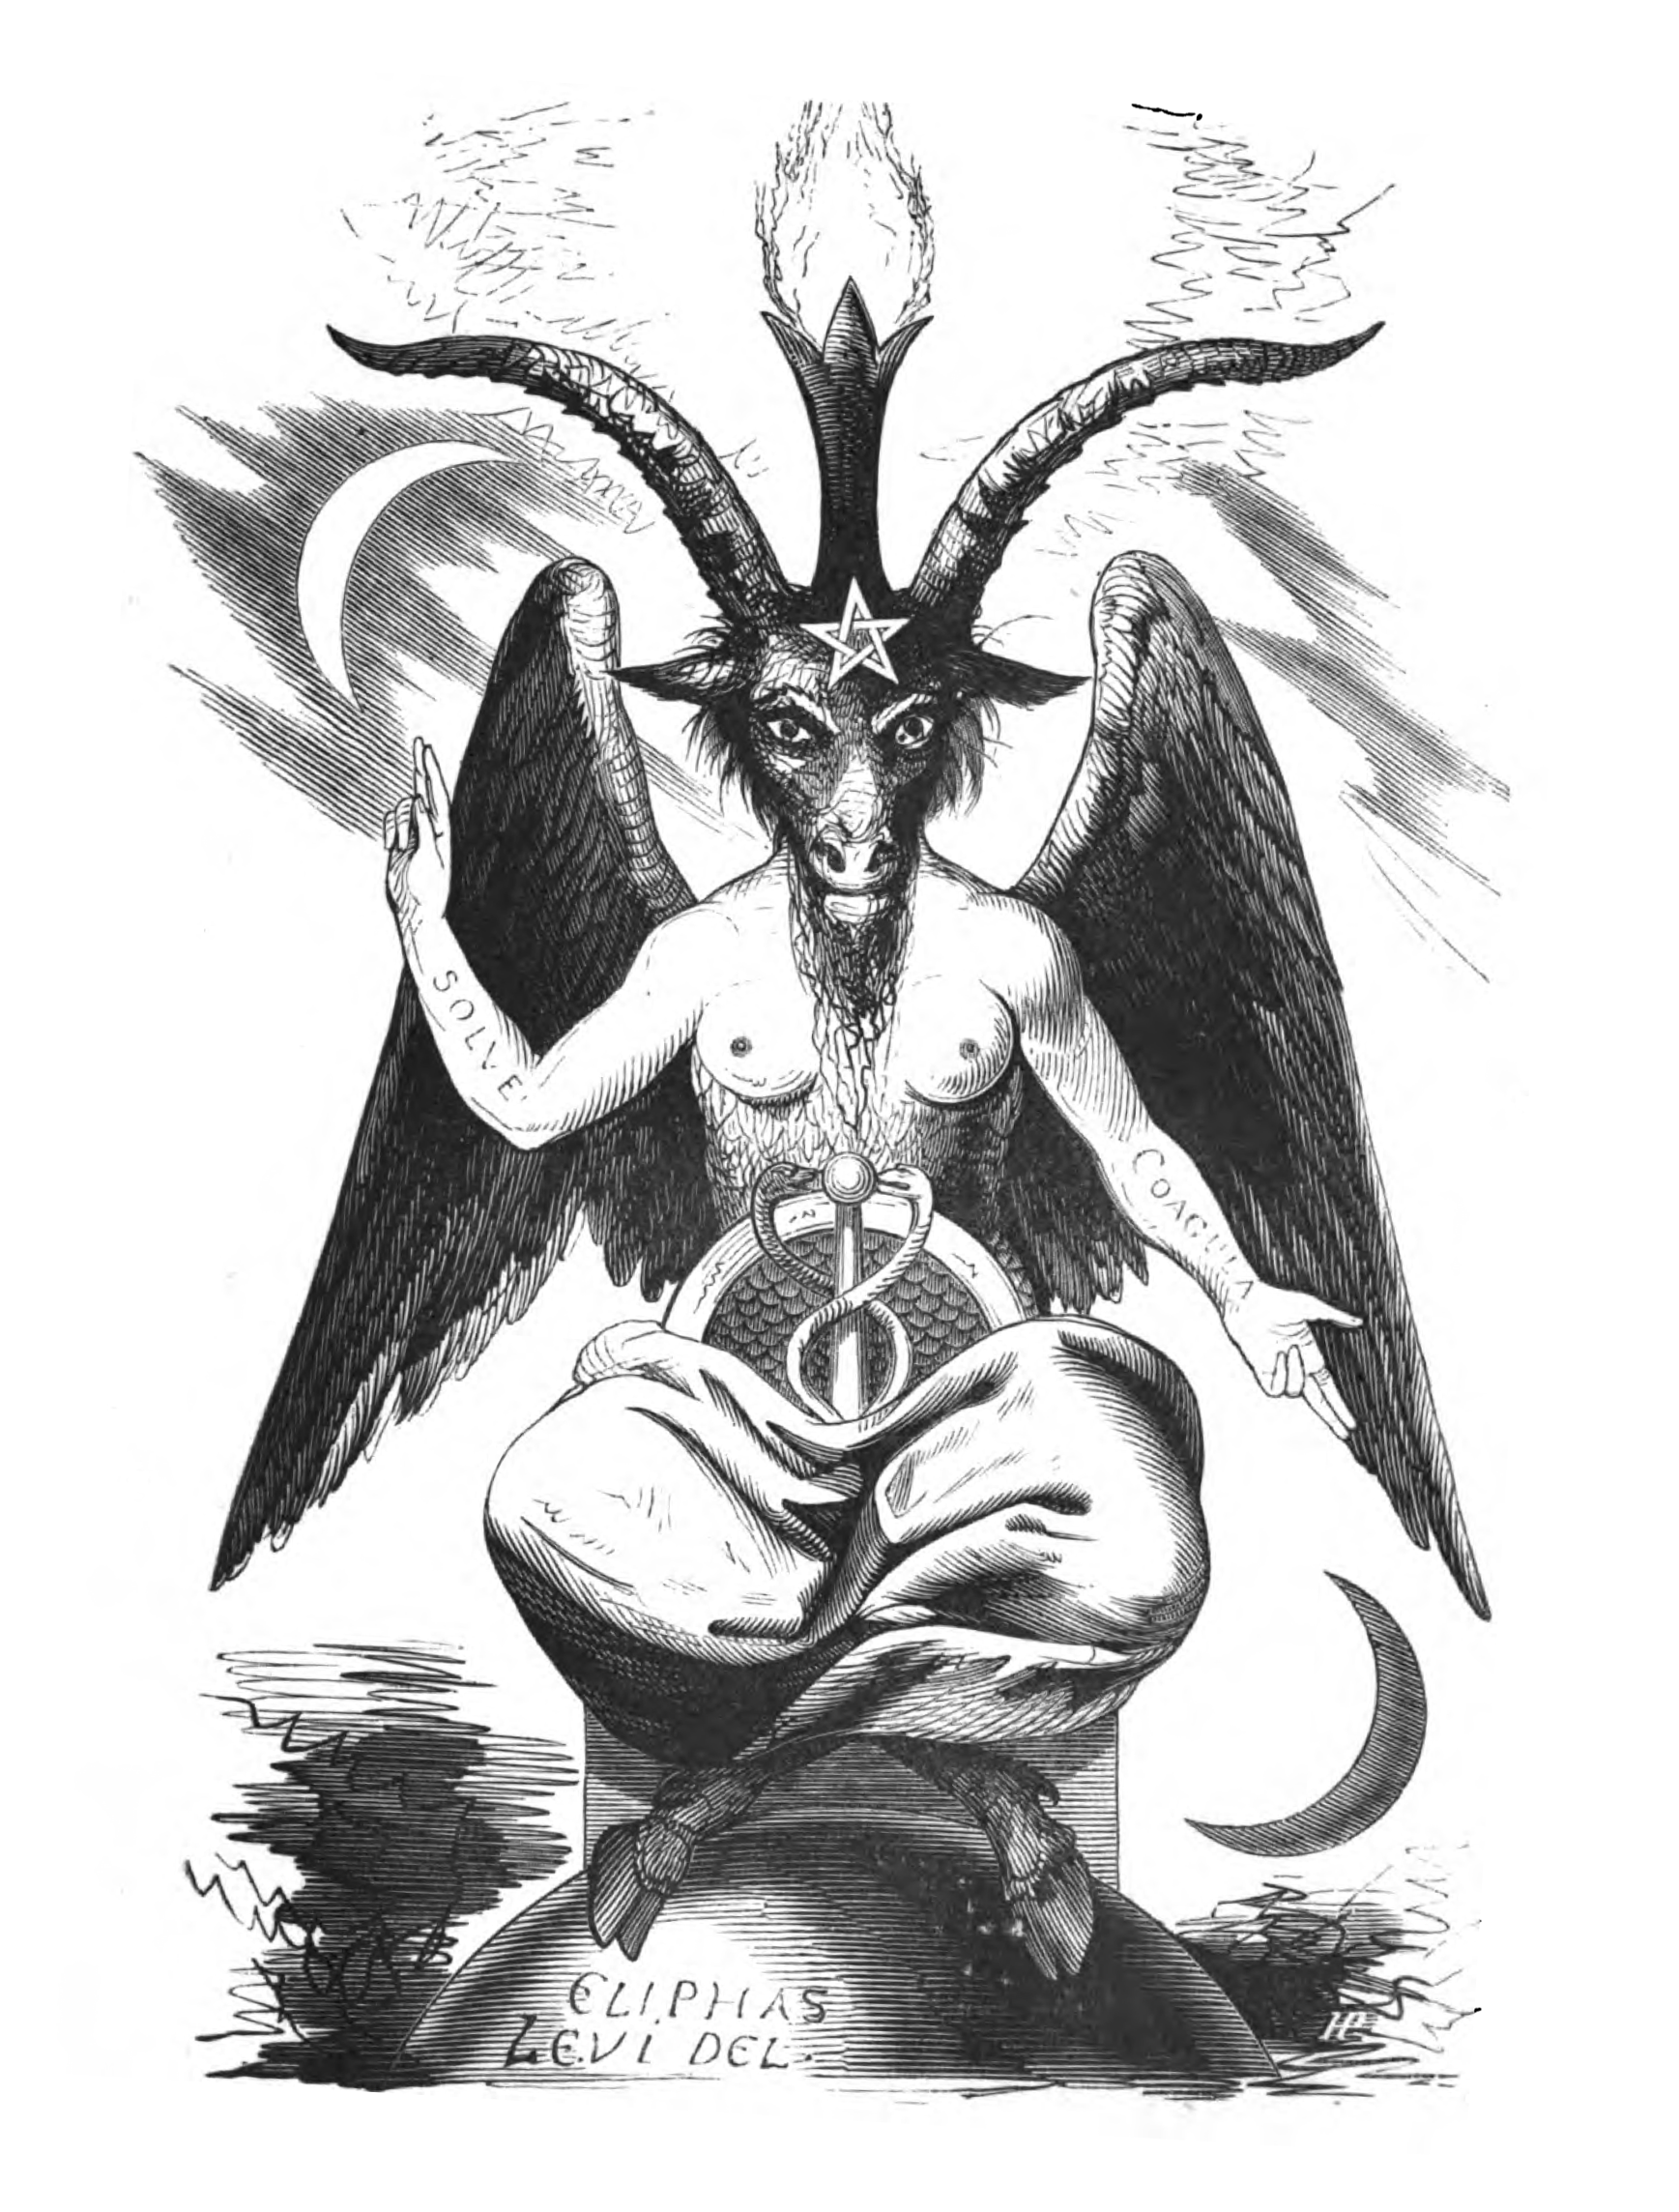 http://upload.wikimedia.org/wikipedia/commons/a/a4/Baphomet.png